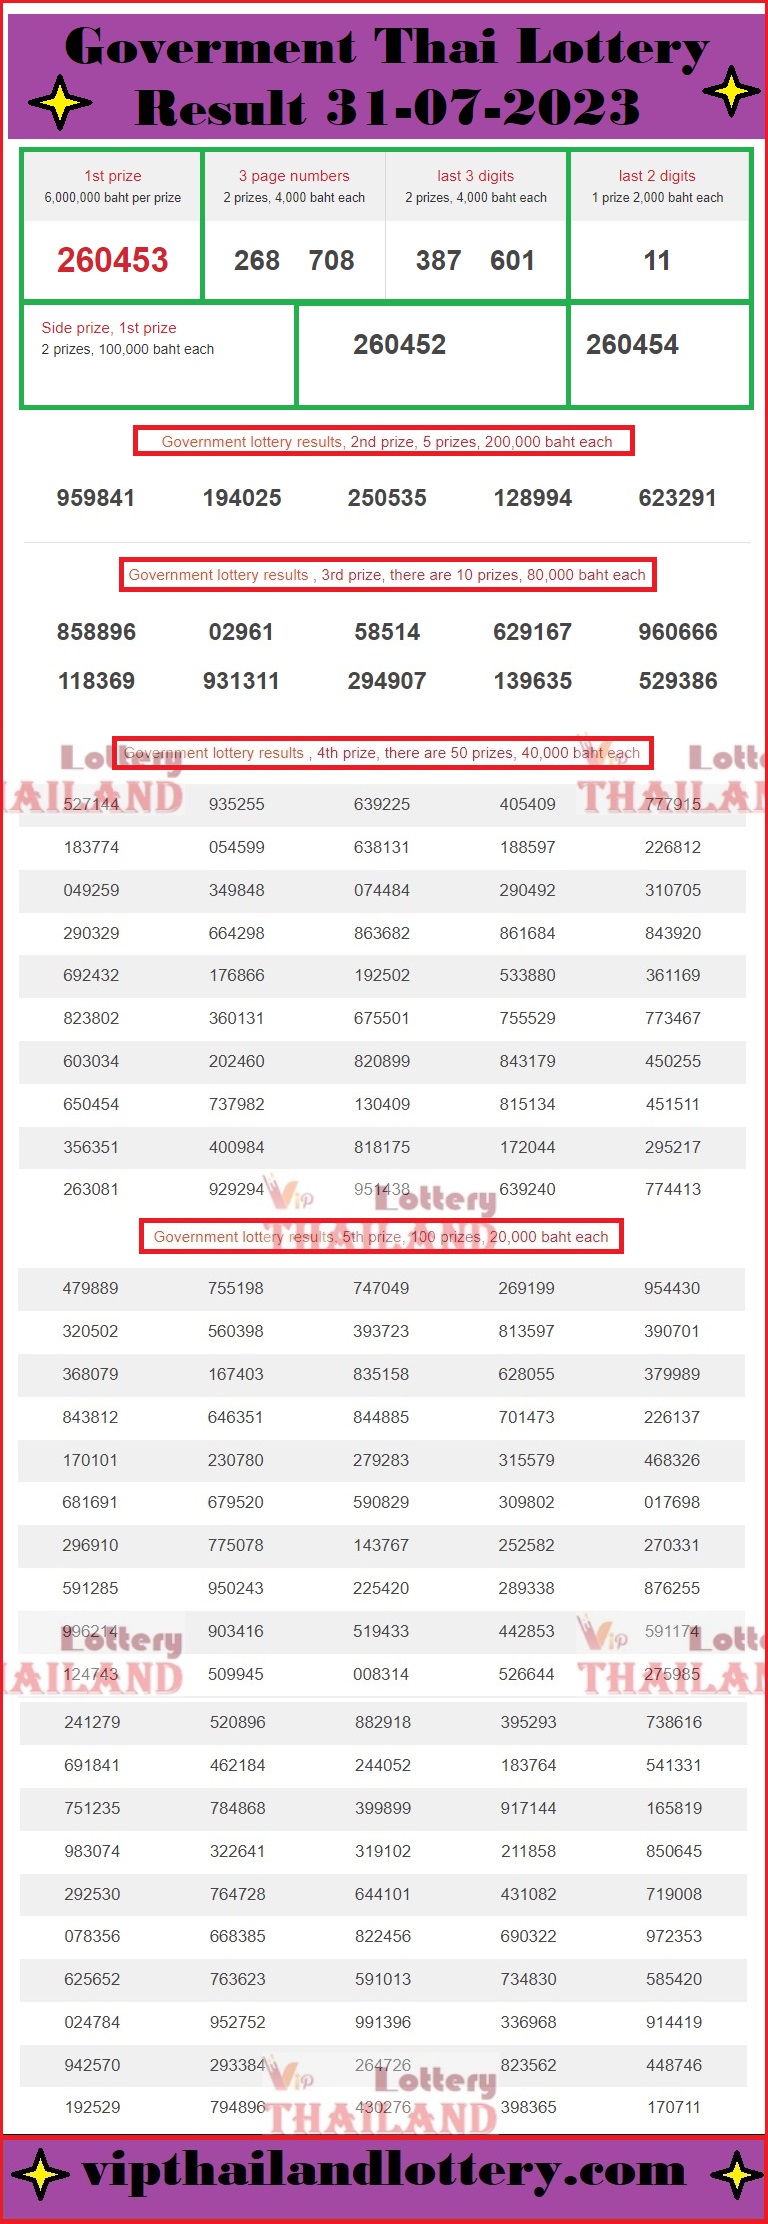 Thai lottery result 31-07-2023